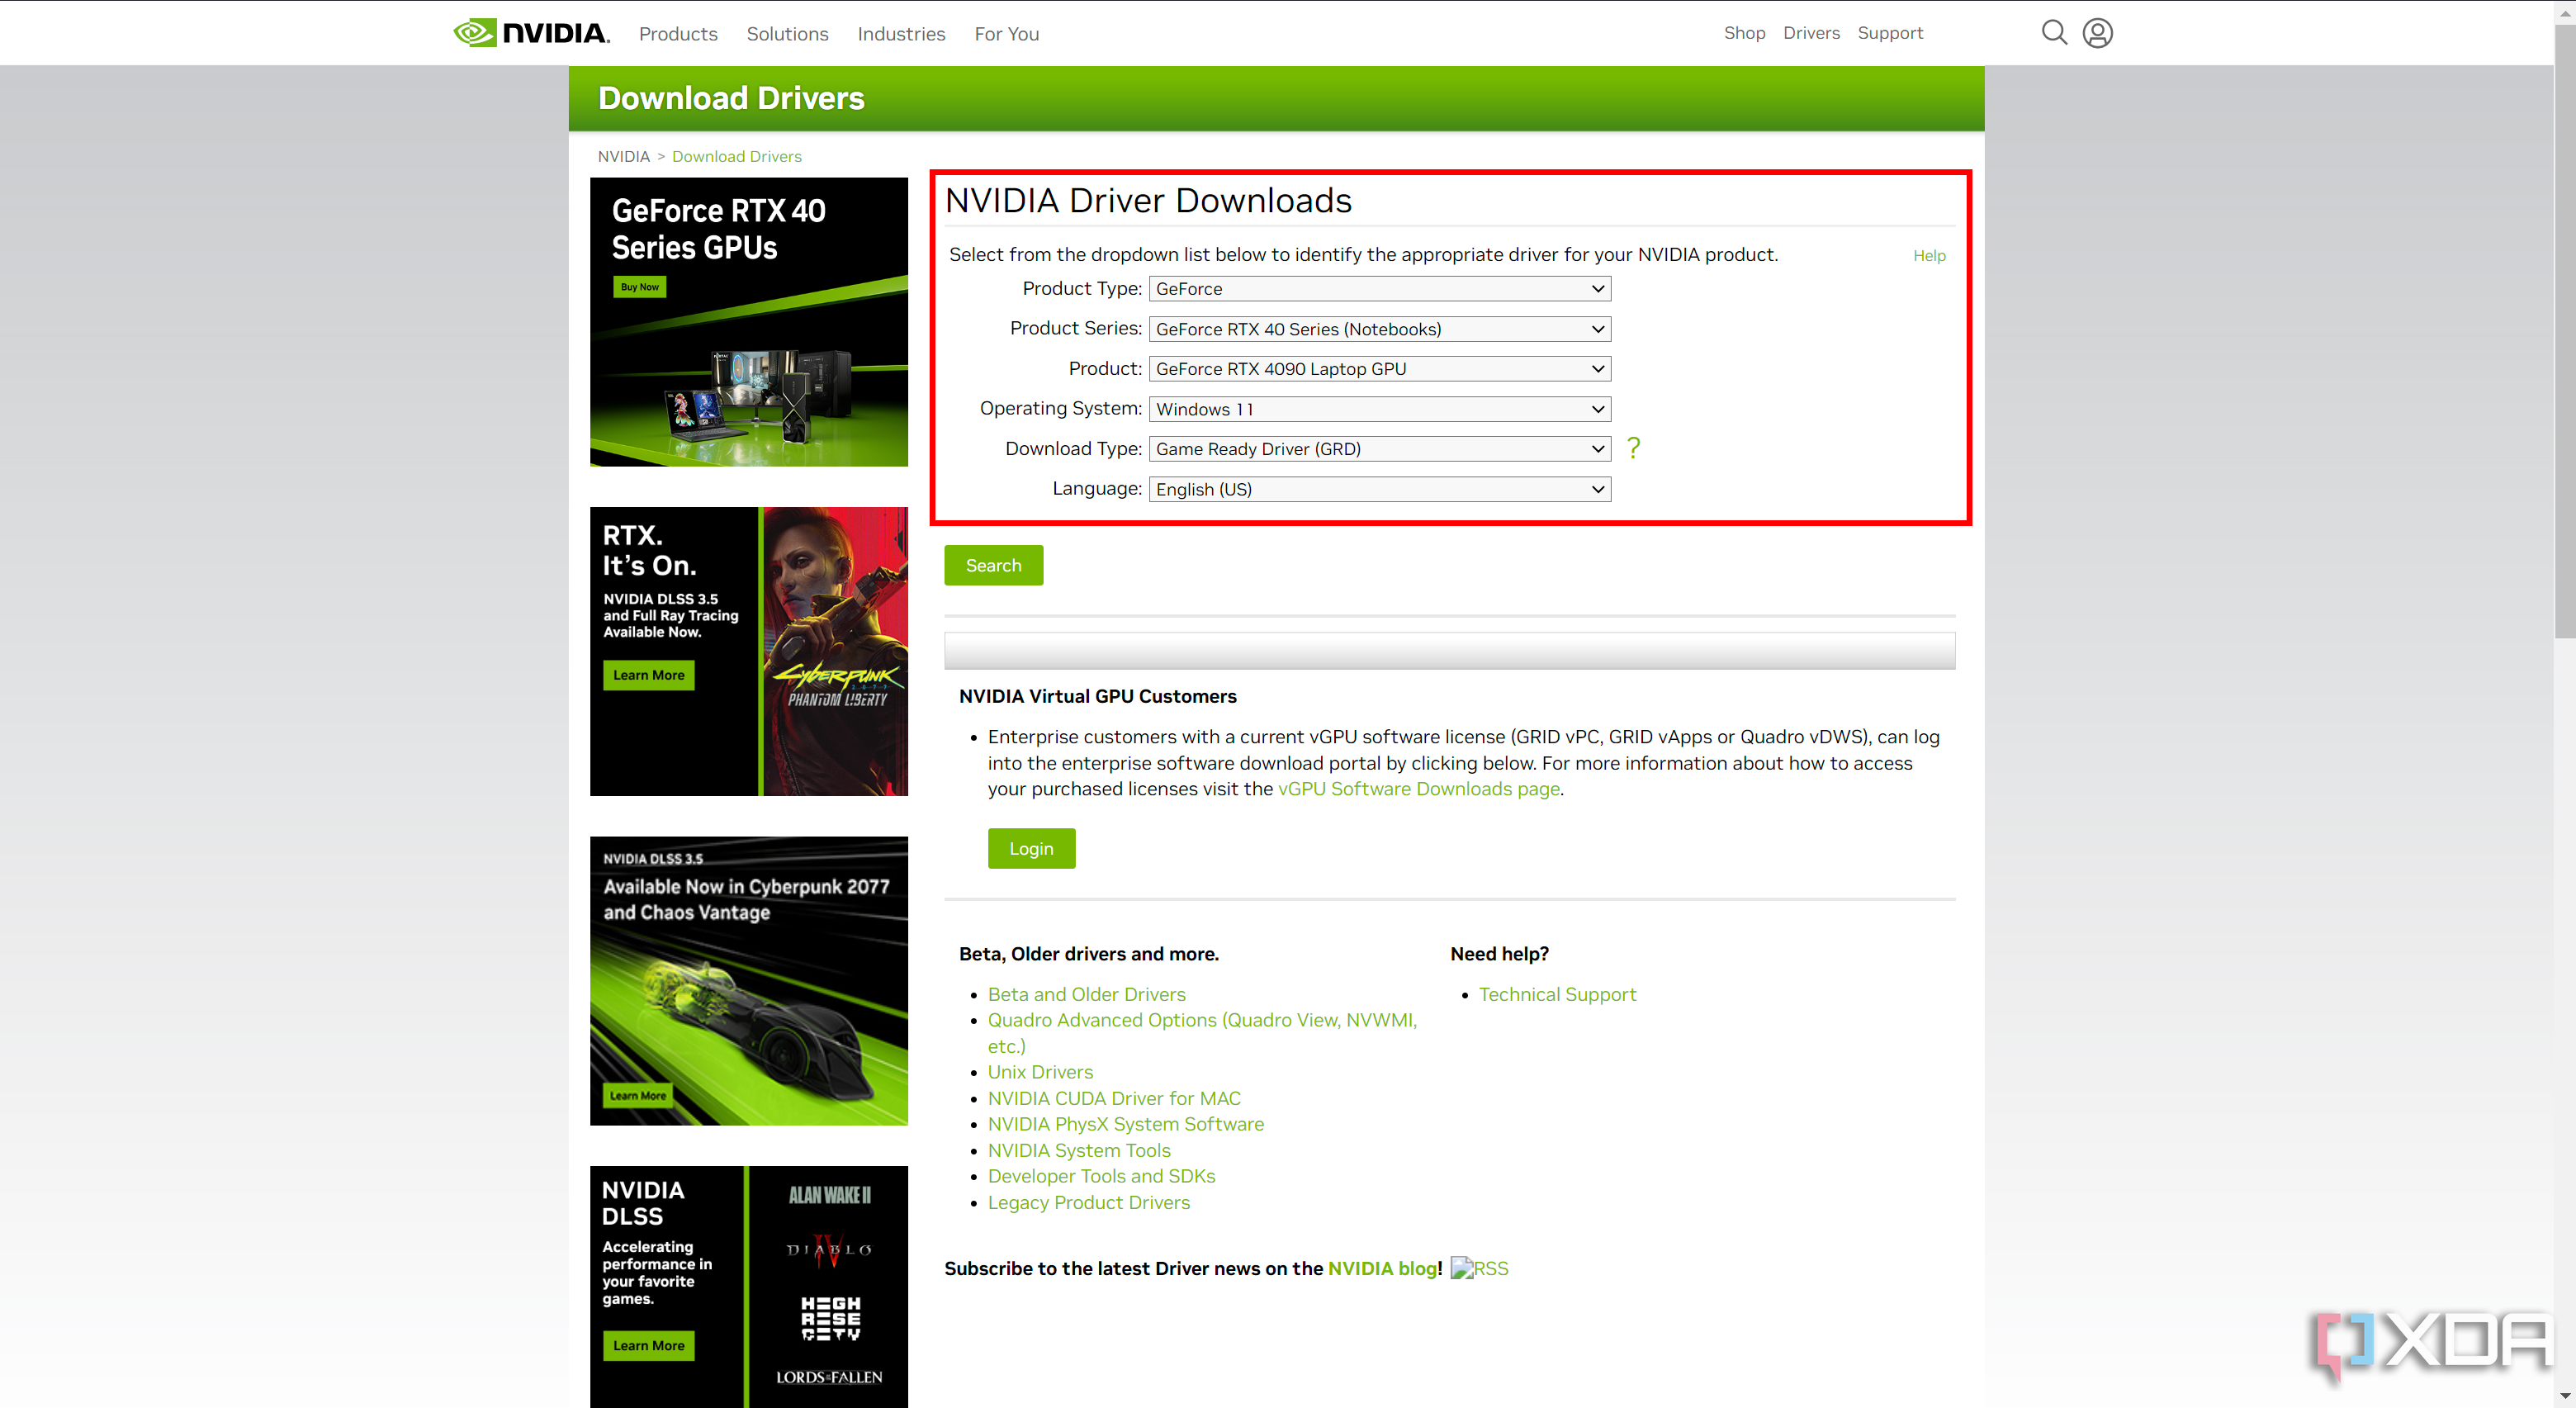 Screenshot of Nvidia's driver download website with the fields filled in to choose the correct driver and product